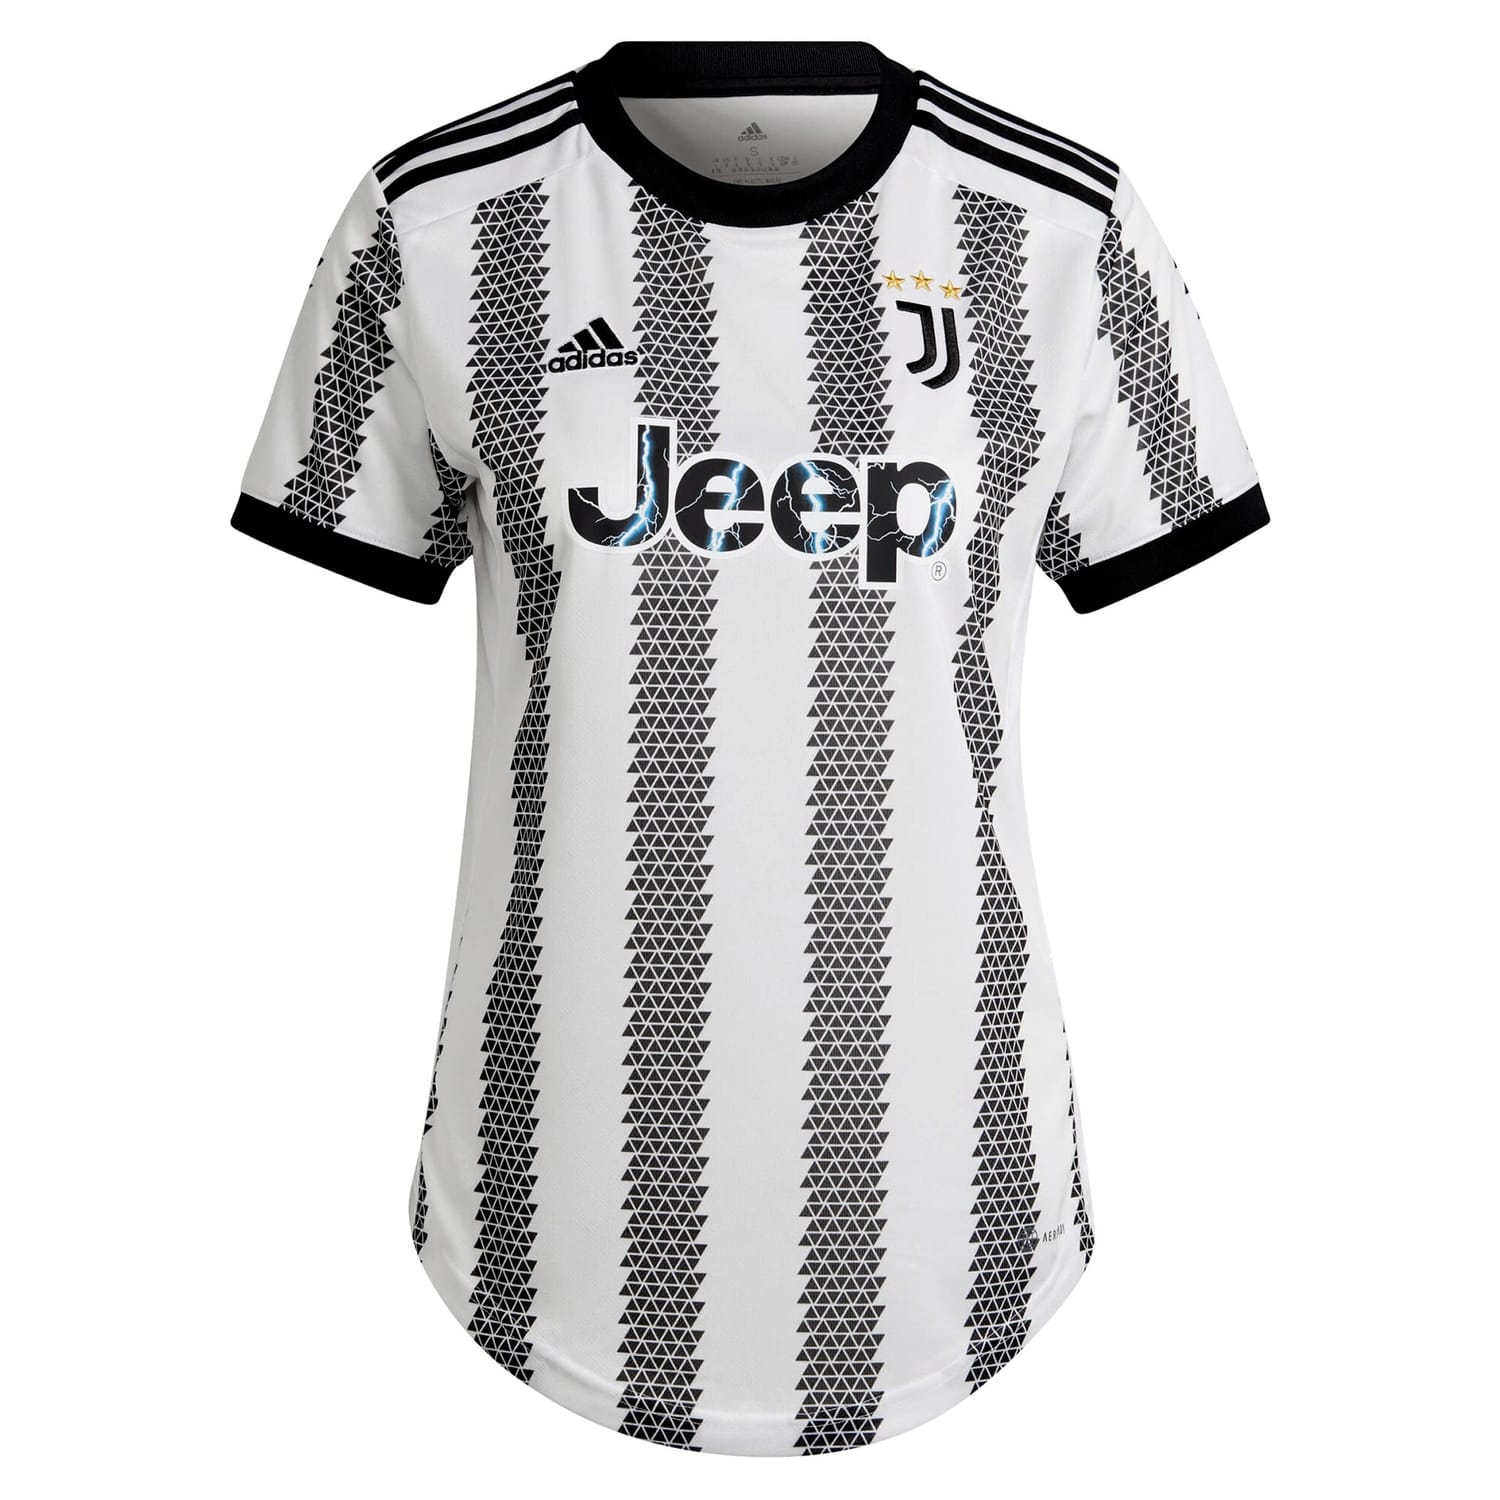 Serie A Juventus Home Jersey Shirt 2022-23 player Federico Chiesa 7 printing for Women